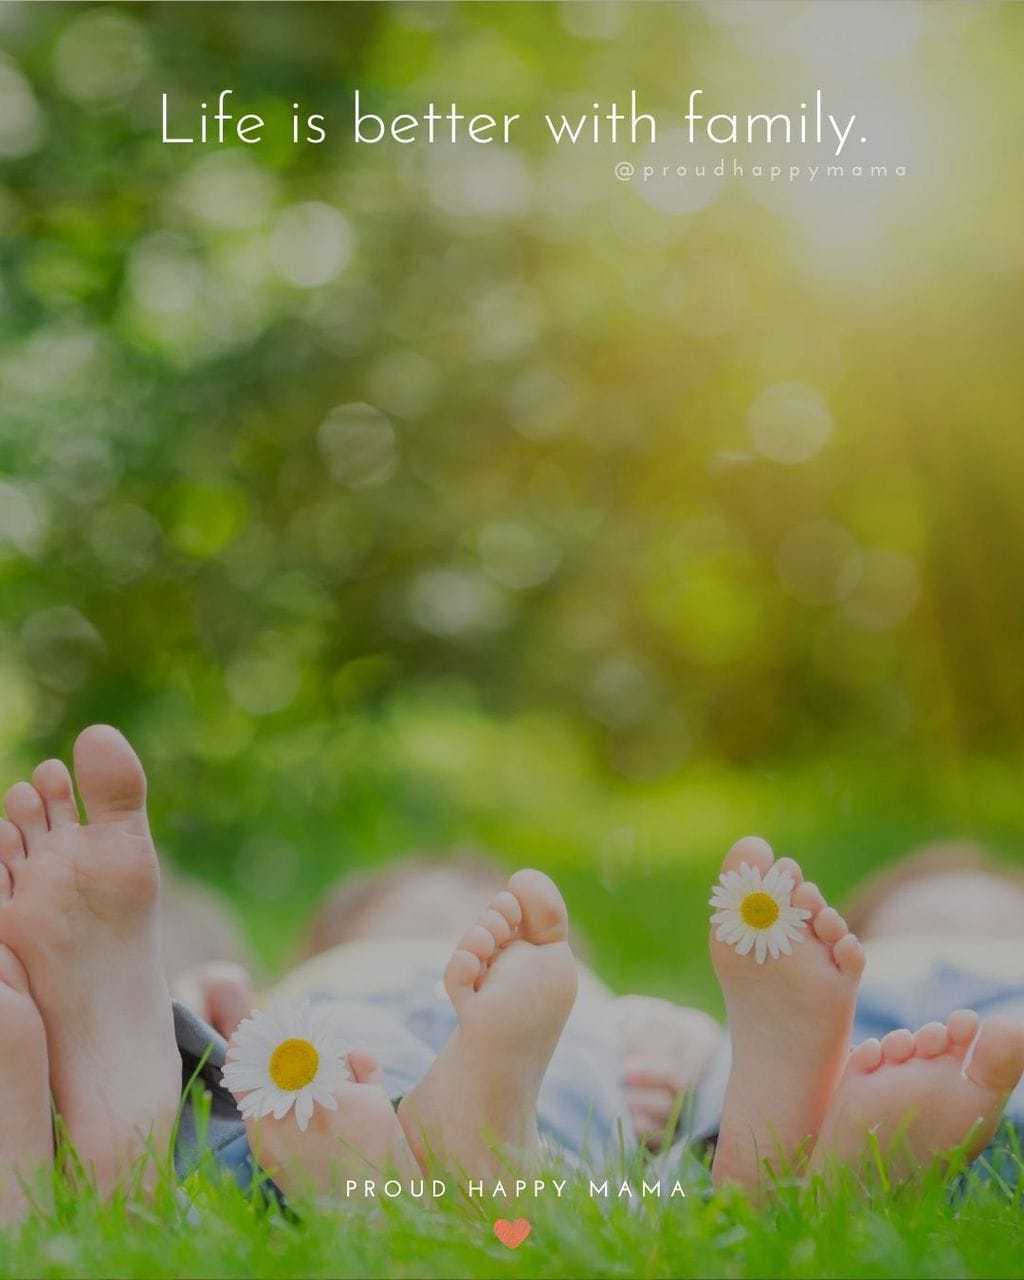 Quotes About A Loving Family | Life is better with family.